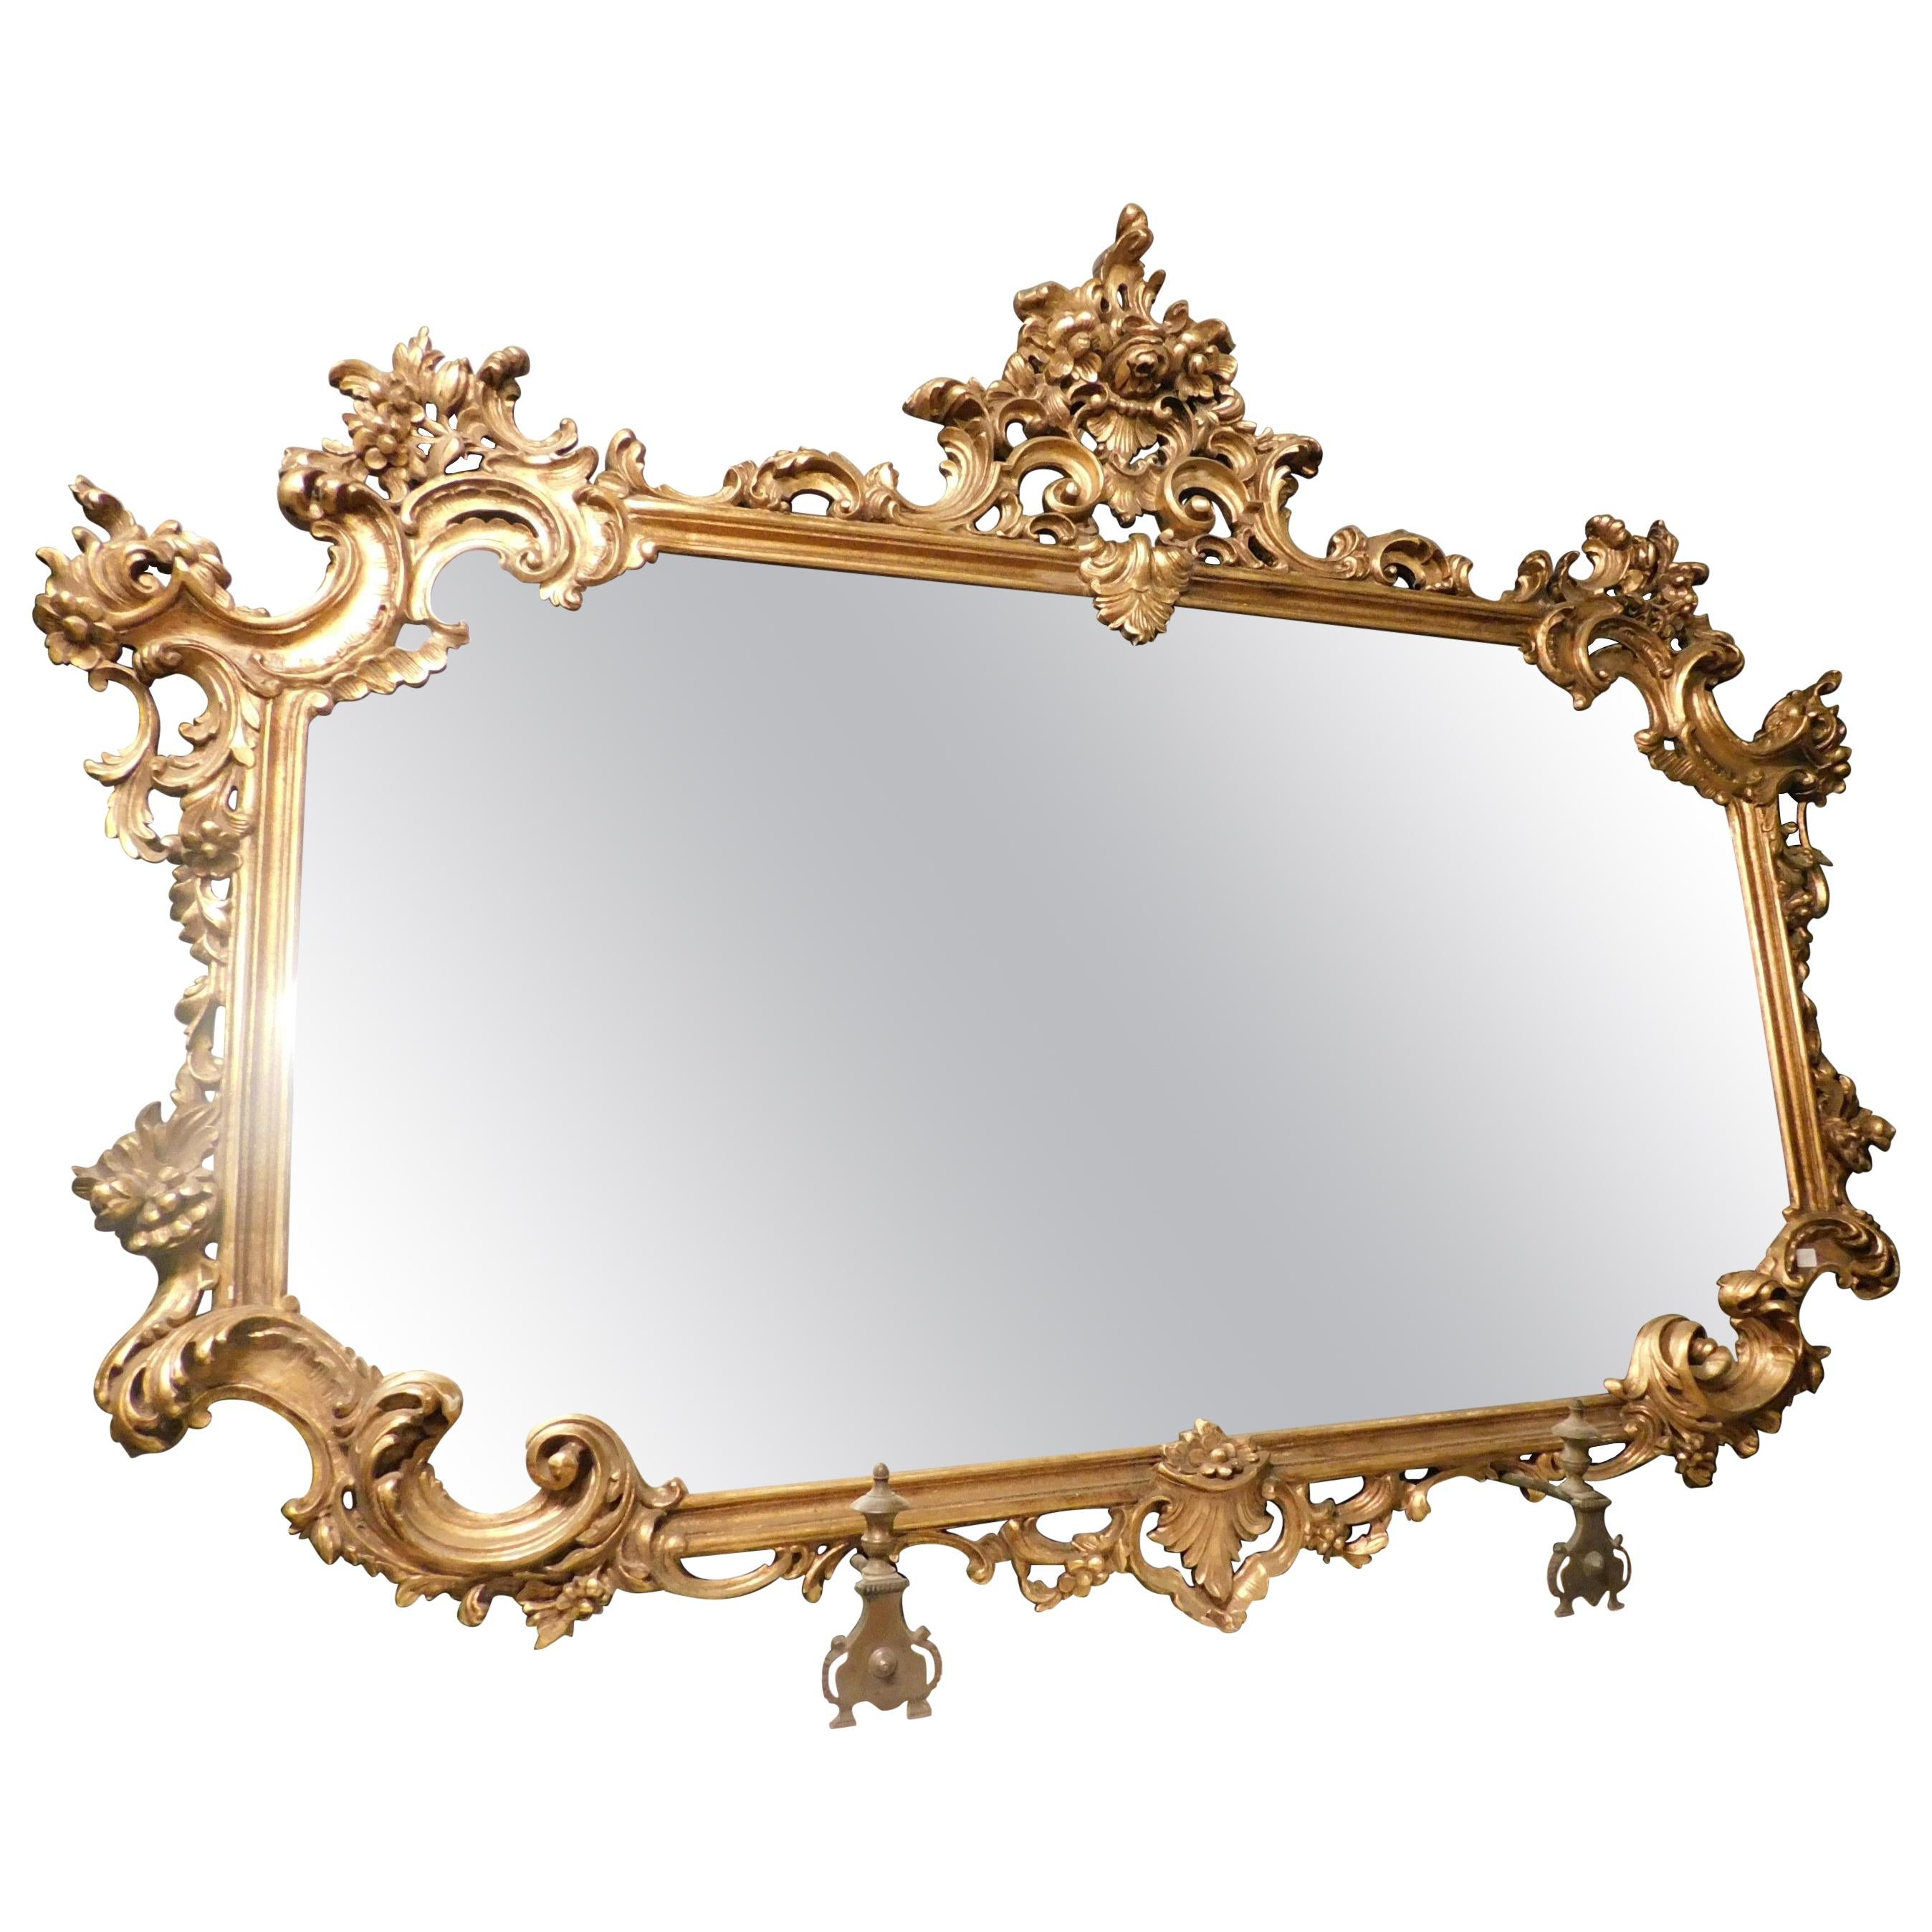 Vintage Gilded and Richly Carved Mirror, Rectangular, 20th Century Italy